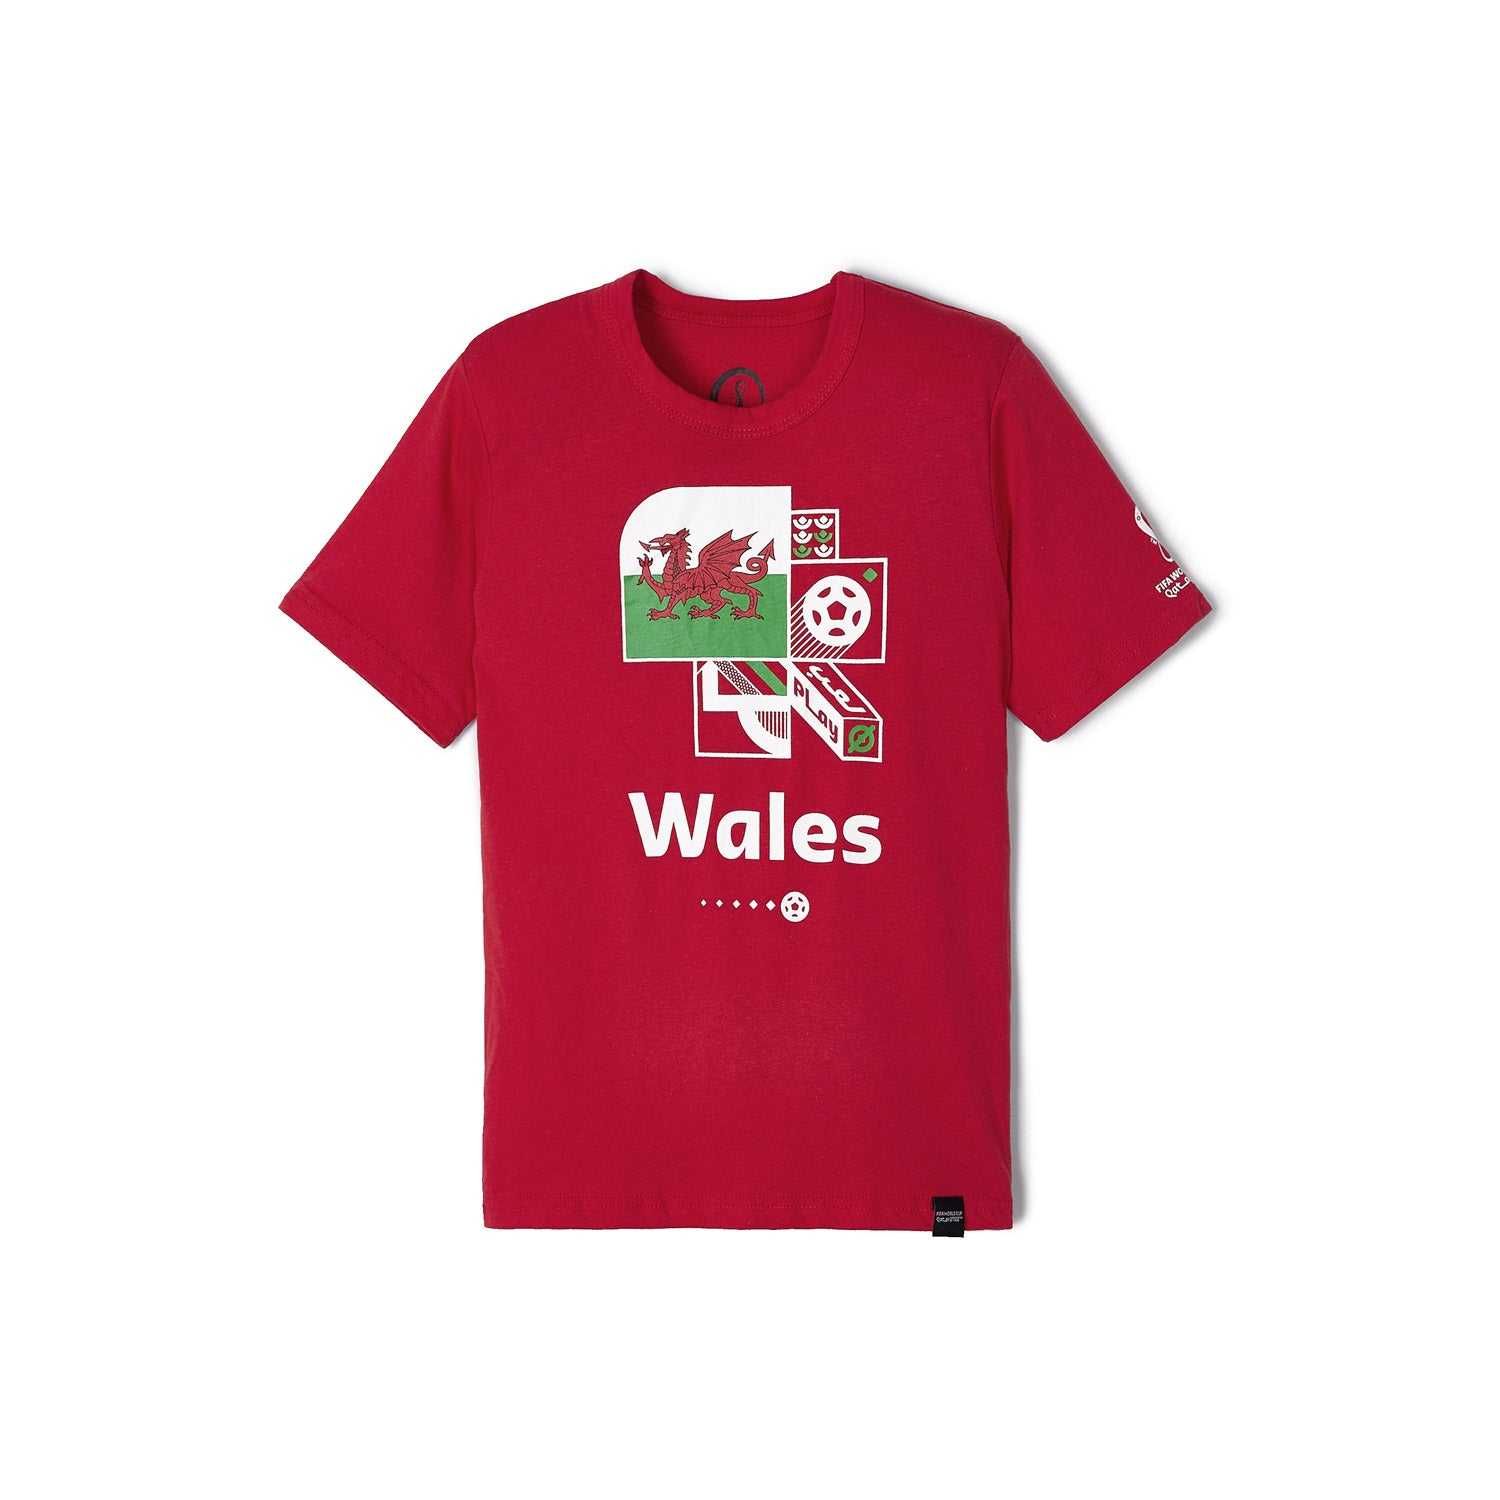 2022 World Cup Wales Red T-Shirt - Youth